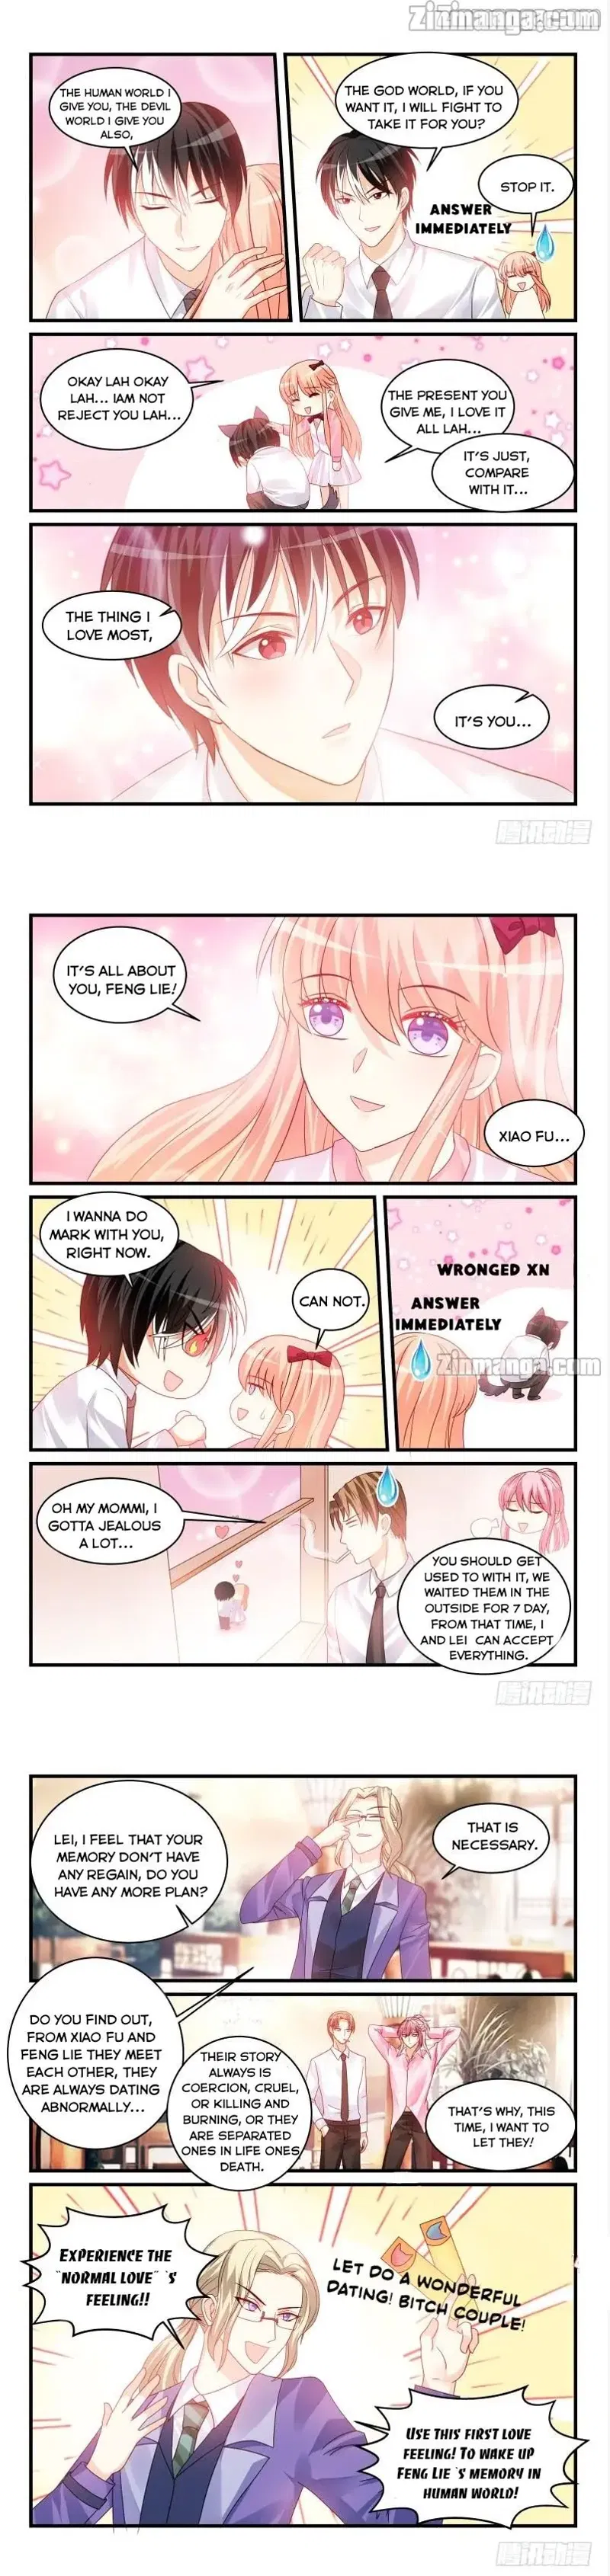 Teach the devil husband Chapter 221 page 4